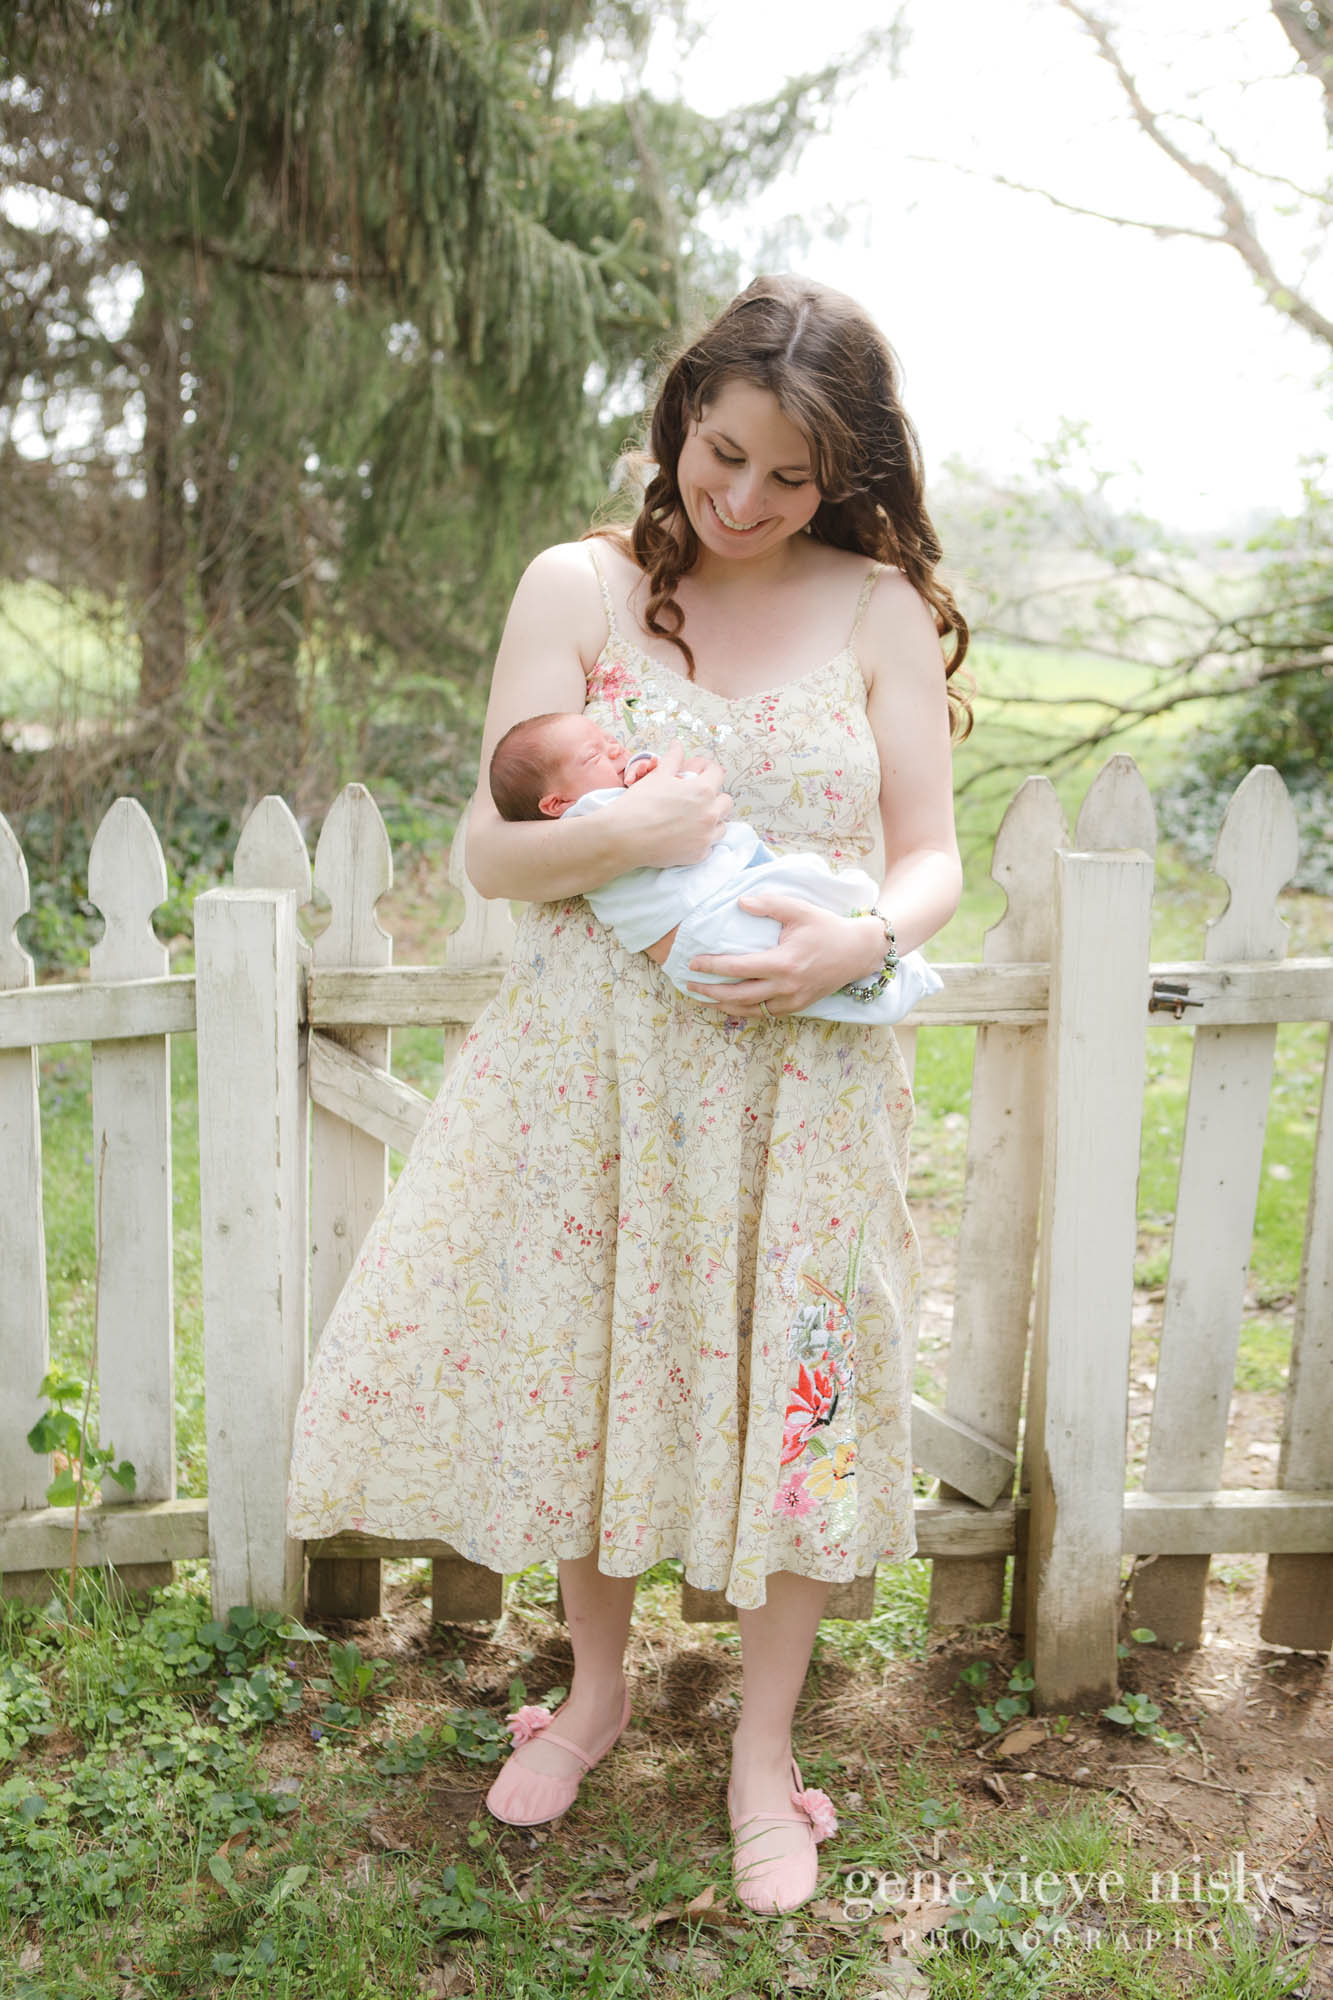  Baby, Copyright Genevieve Nisly Photography, Family, Portraits, Spring